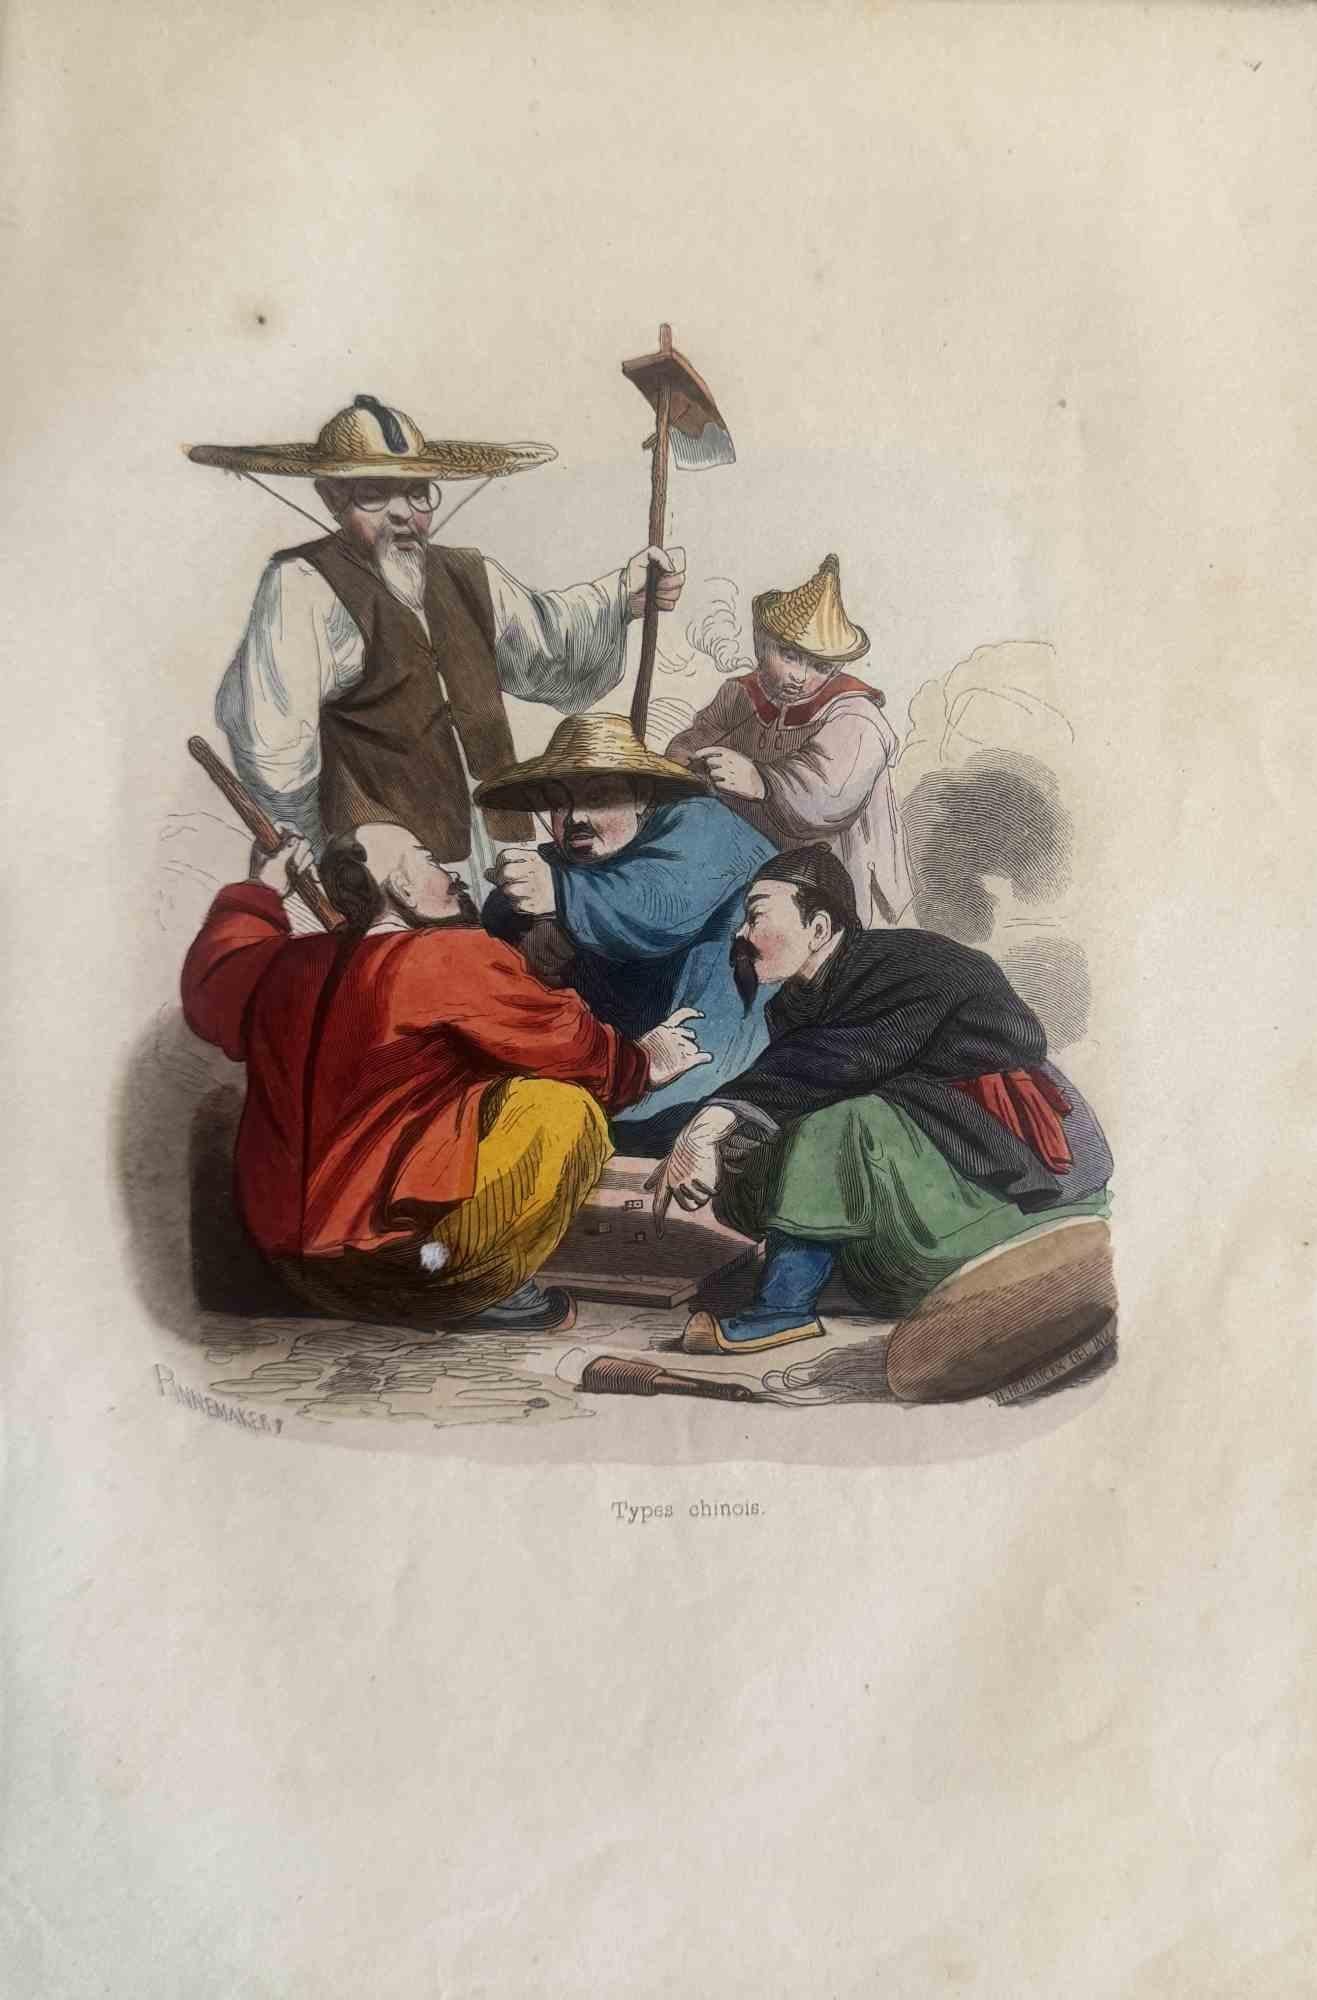 Various Artists Figurative Print - Uses and Customs - Chinese  - Lithograph - 1862